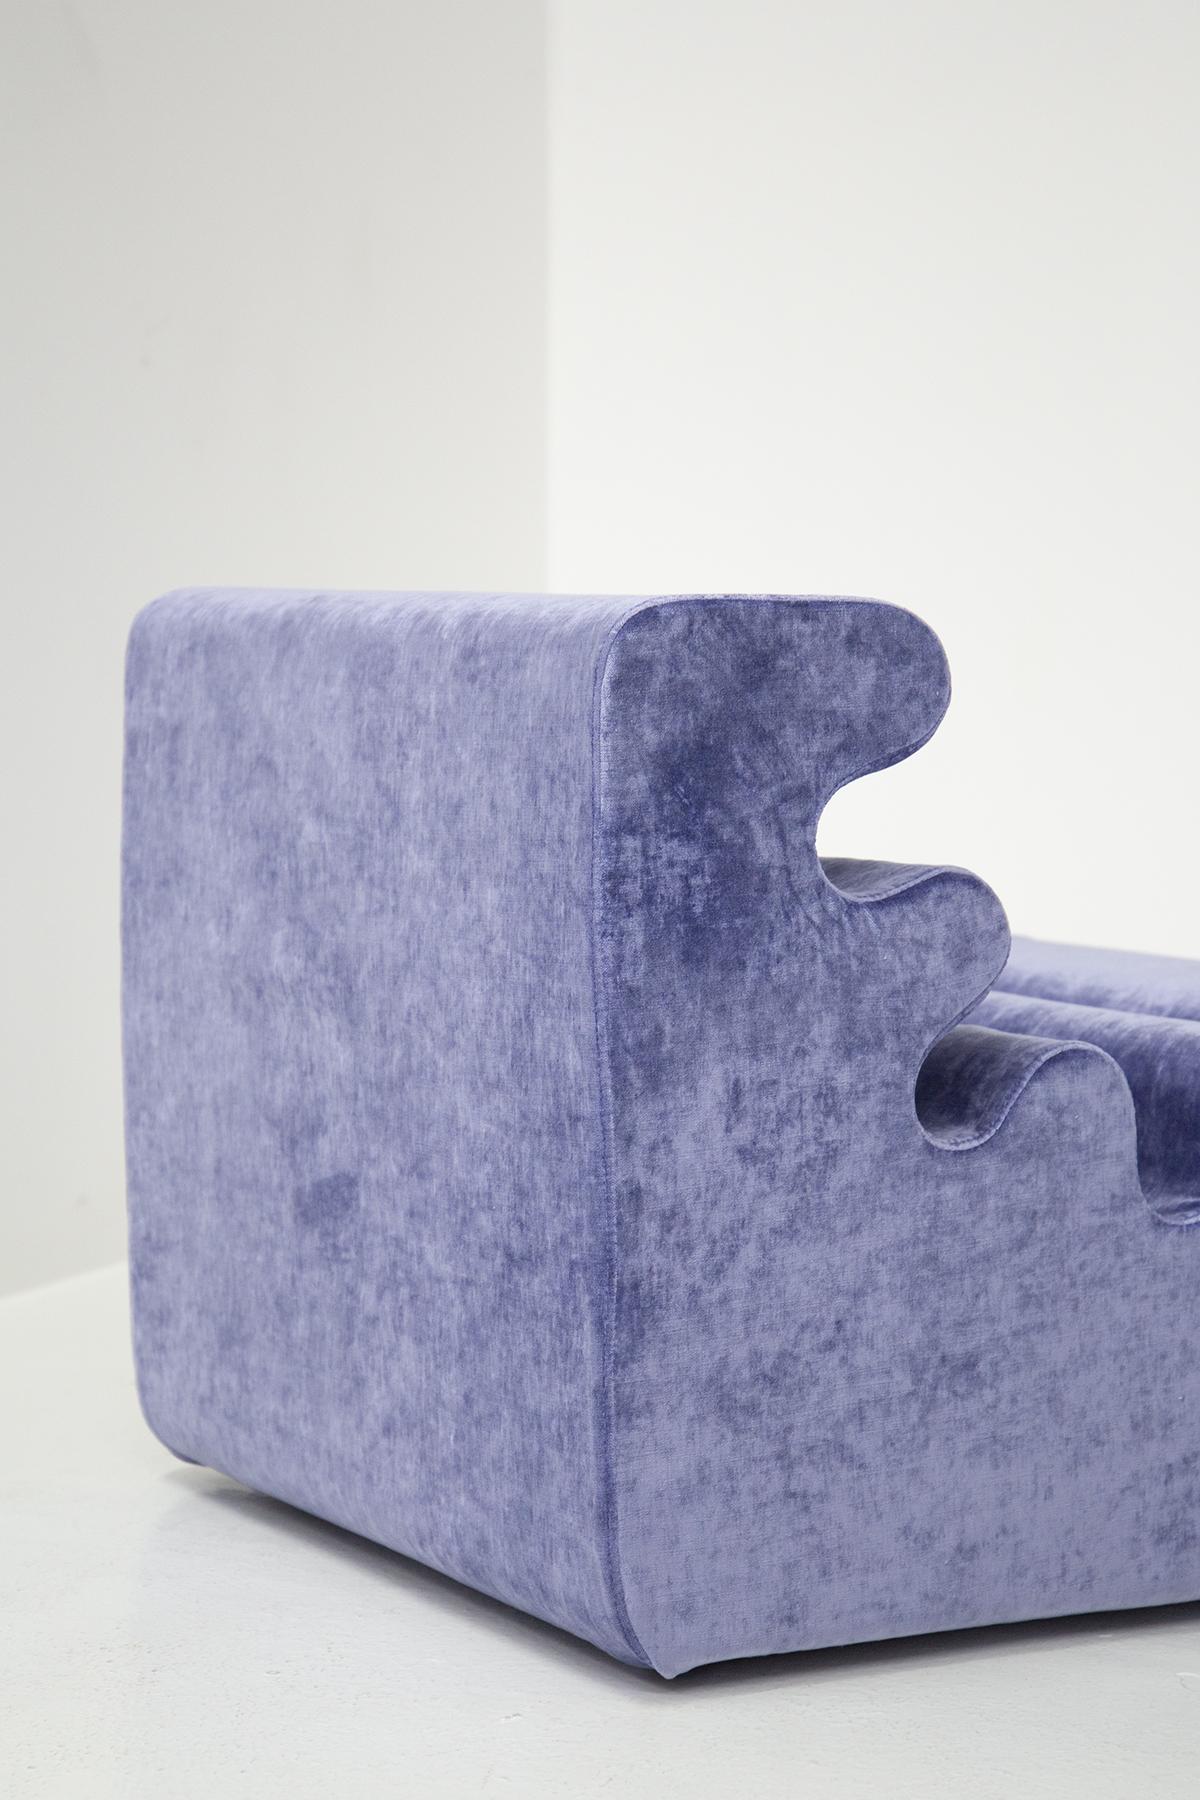 Karelia armchair design by Lisii Beckman for Zanotta with structure in polyurethane foam. The pair of armchairs has been reupholstered with removable cover in soft purple velvet.
Karelia, designed in 1966 by the Finnish designer Lisii Beckmann. It